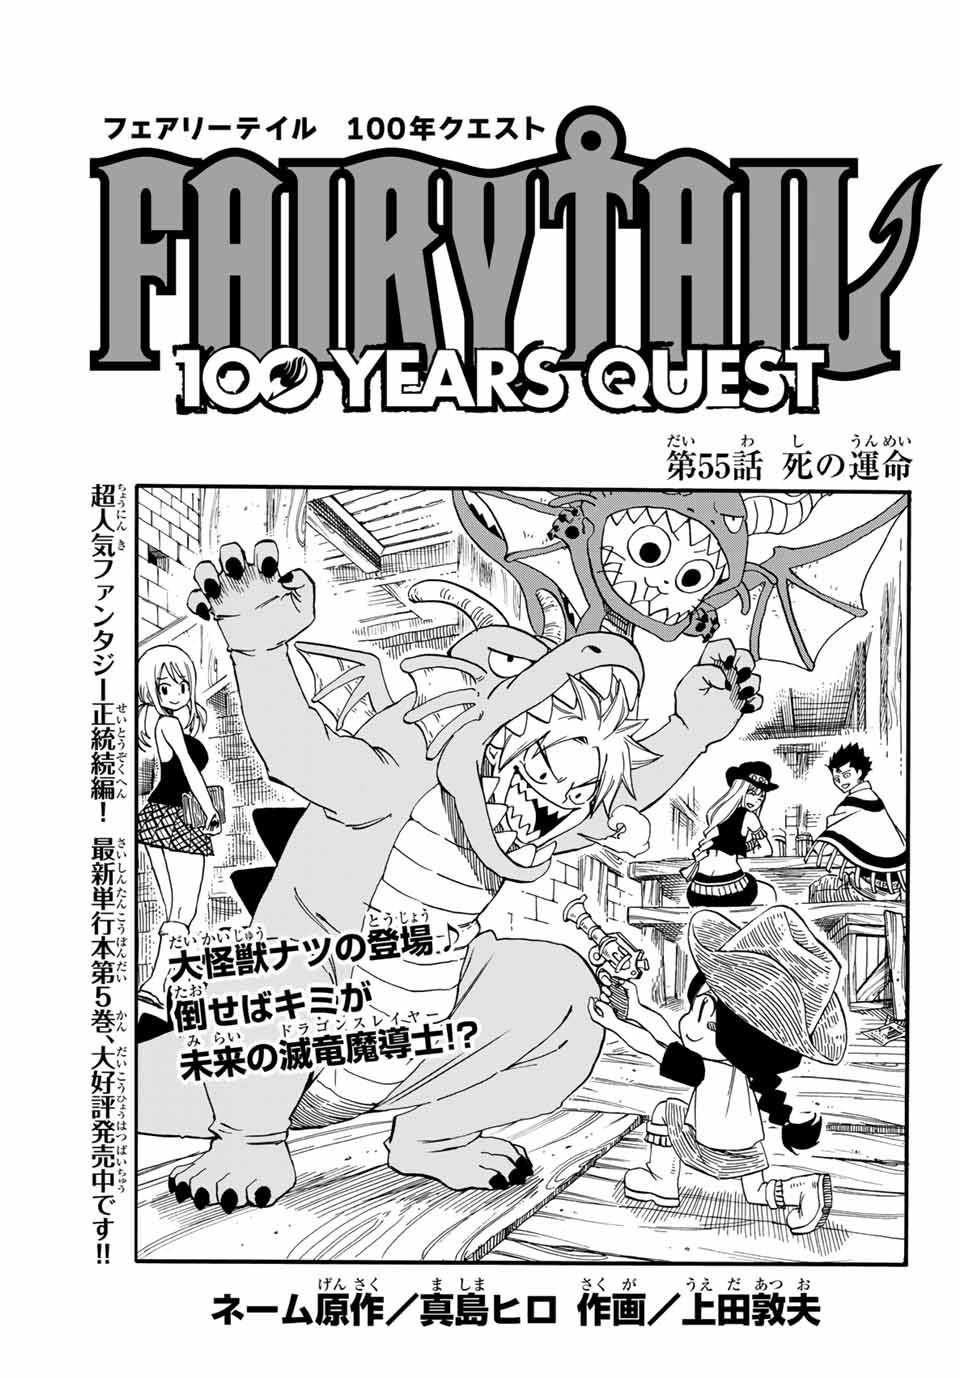 Fairy Tail: 100 Years Quest Chapter 55 | Fairy Tail Wiki | Fandom